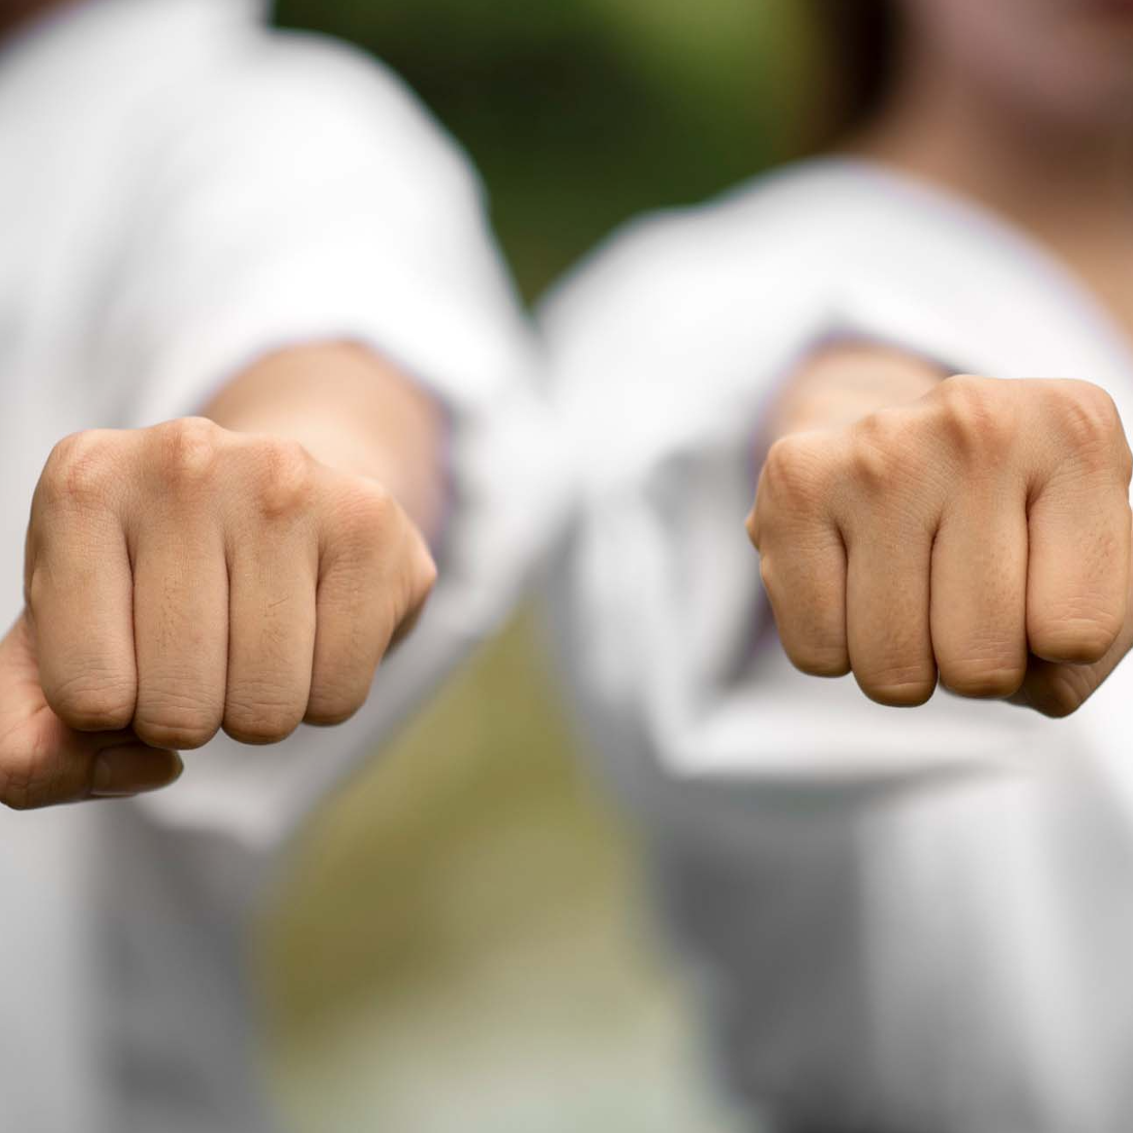 Introduction to self-defense – 10 a.m. to 12 p.m.